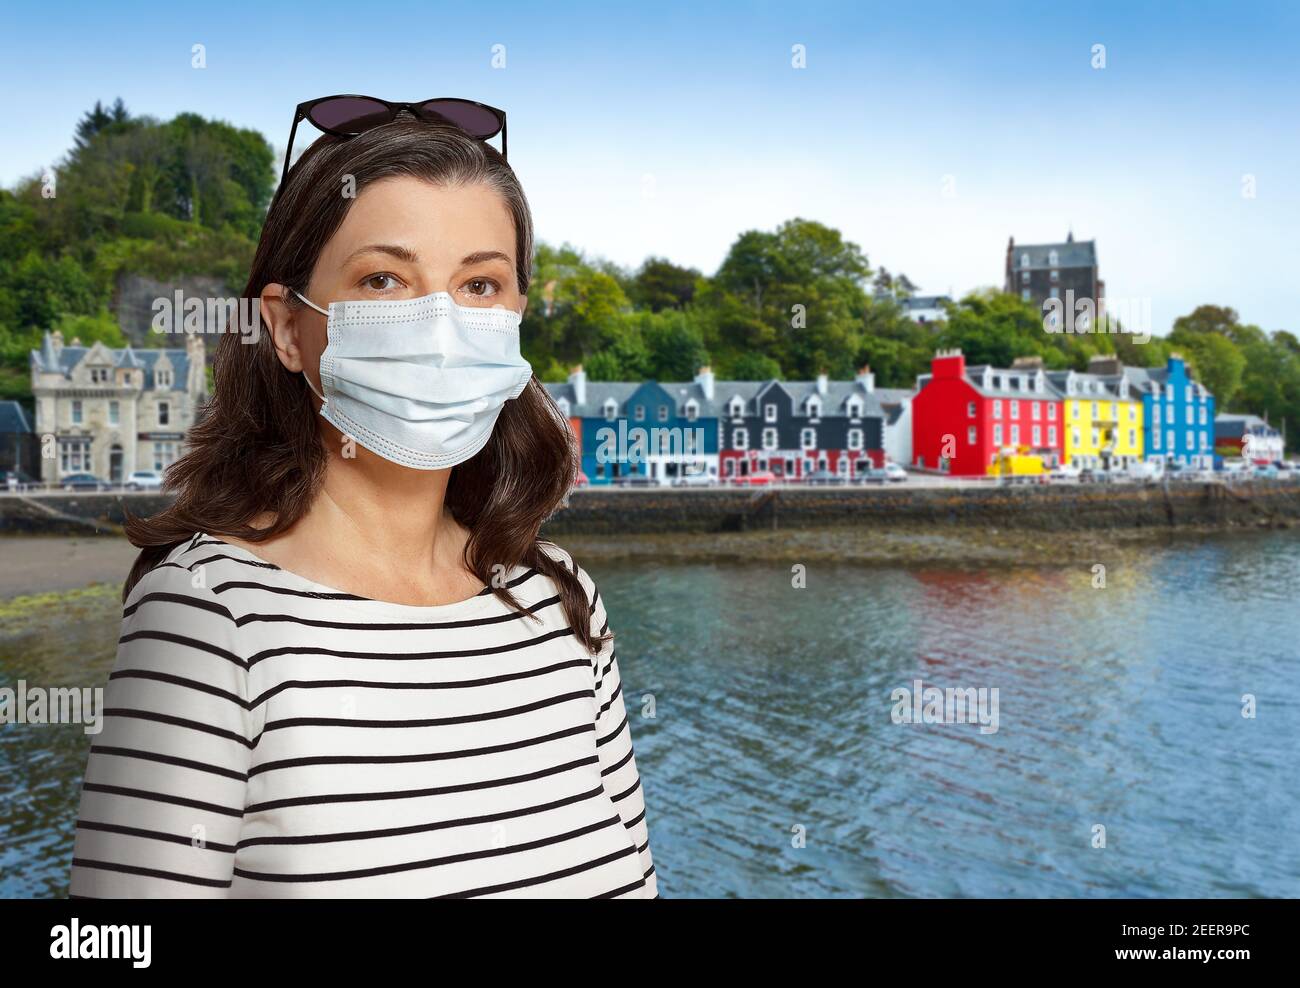 Travelling during the corona or covid pandemic: woman tourist wearing protective face mask at Tobermory, Mull Island, Scotland. Stock Photo